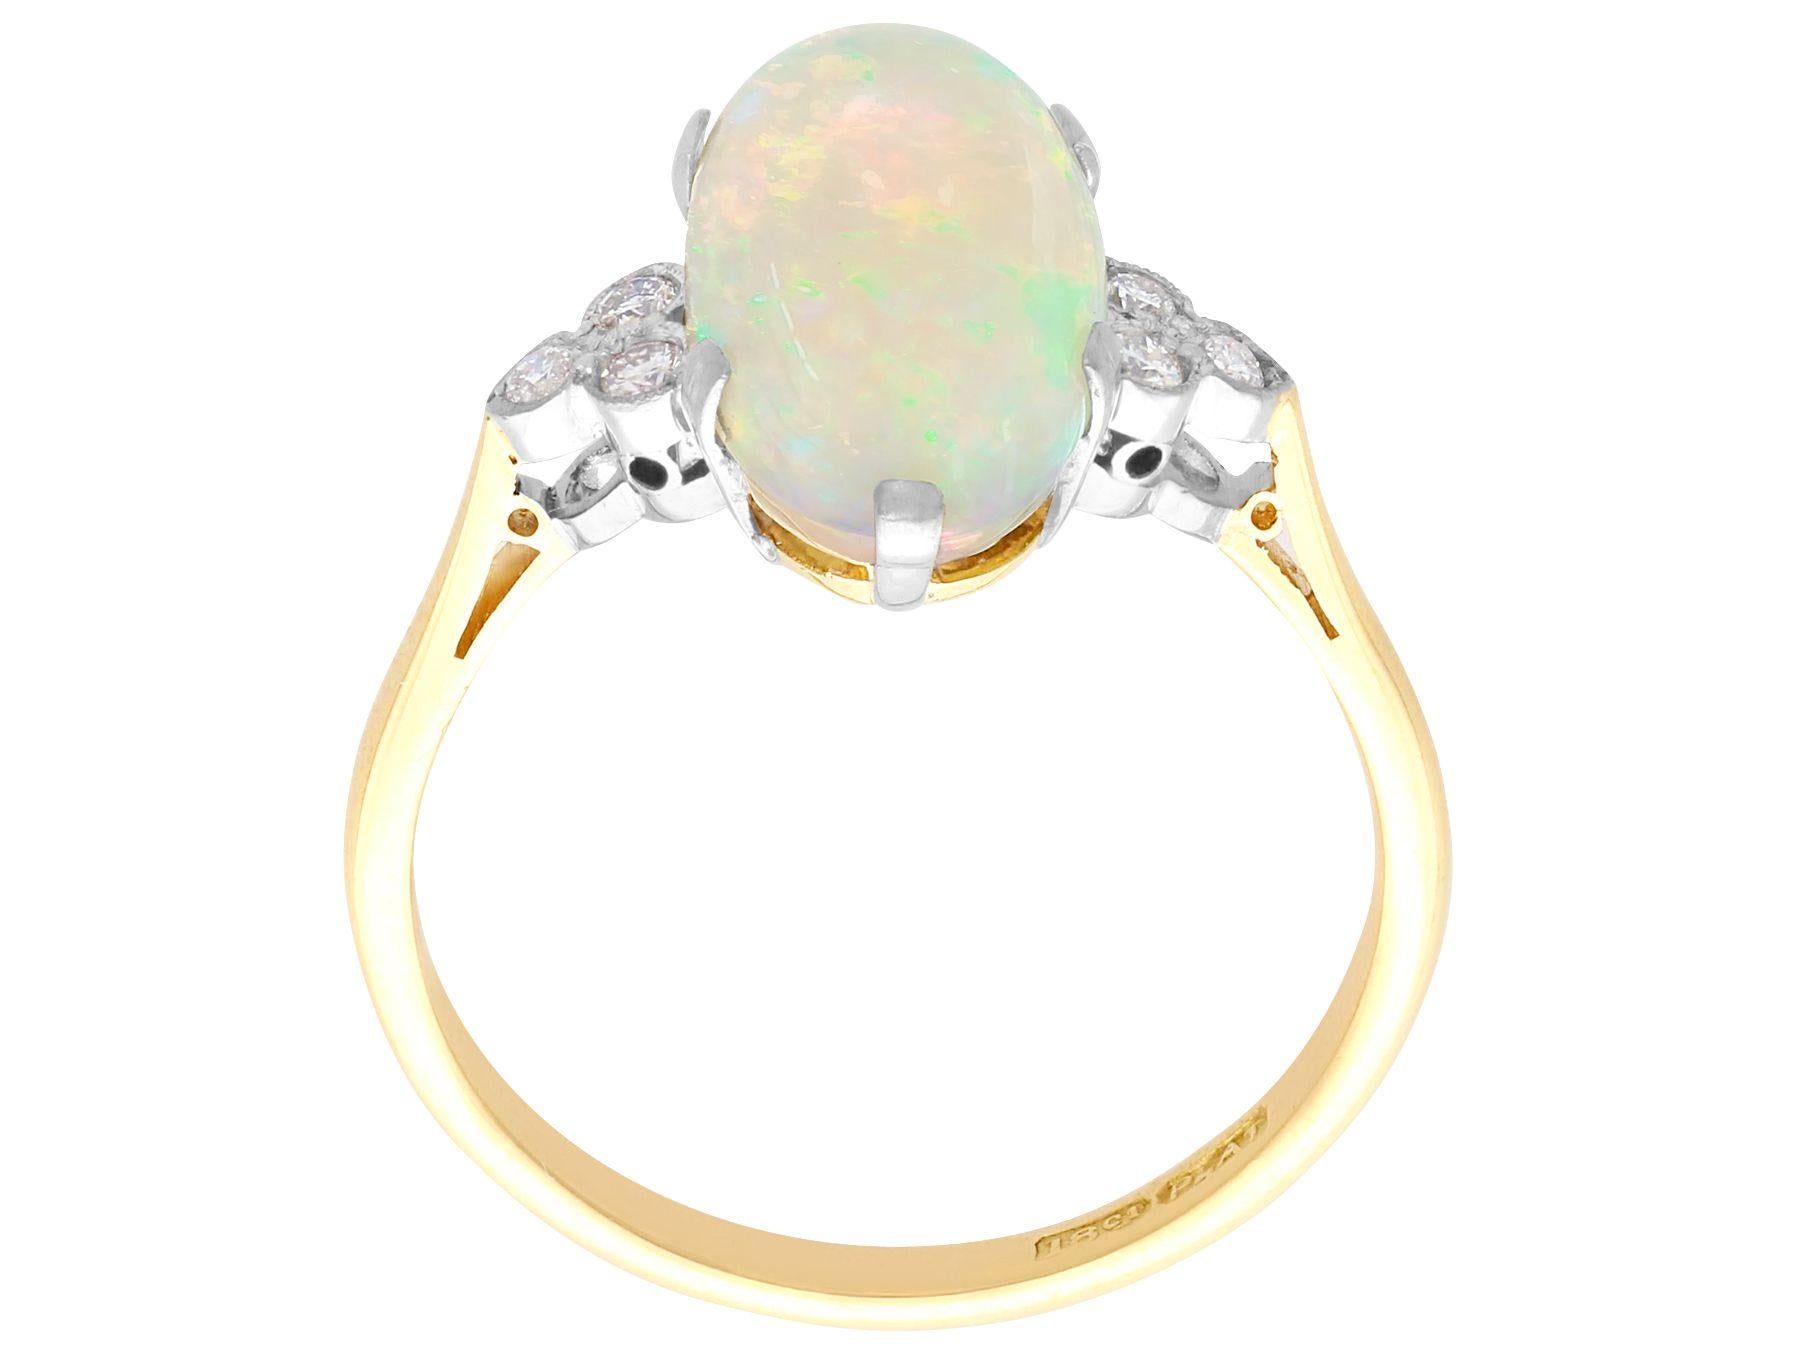 Cabochon Vintage 3.88 Carat Opal Diamond Yellow Gold Engagement Ring, circa 1940 For Sale